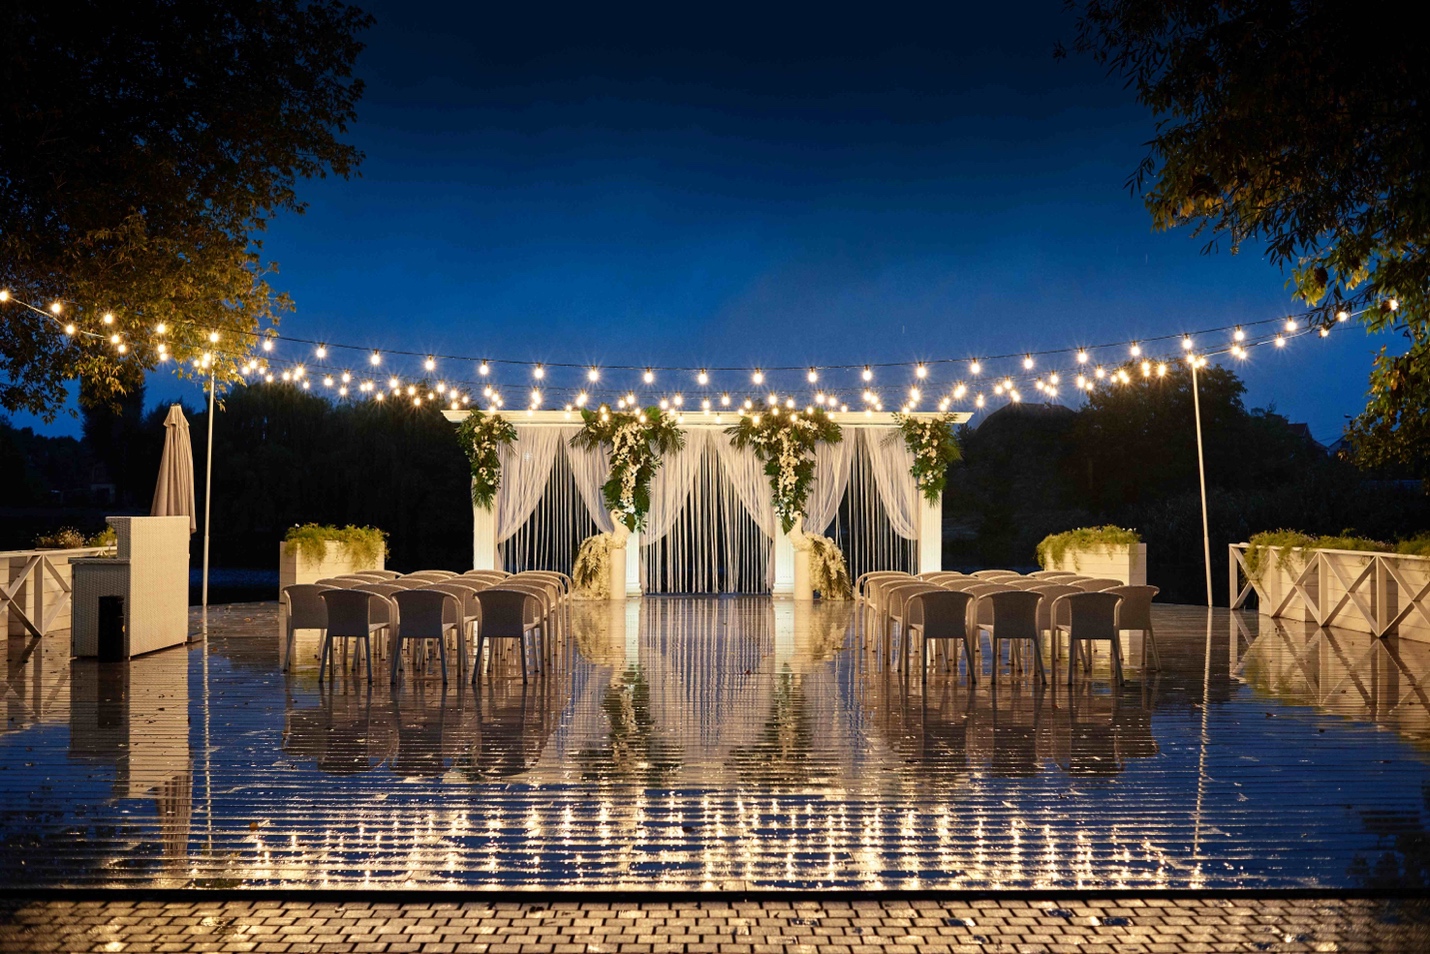 A pool with lights and a white structure with chairs and tables

Description automatically generated with medium confidence